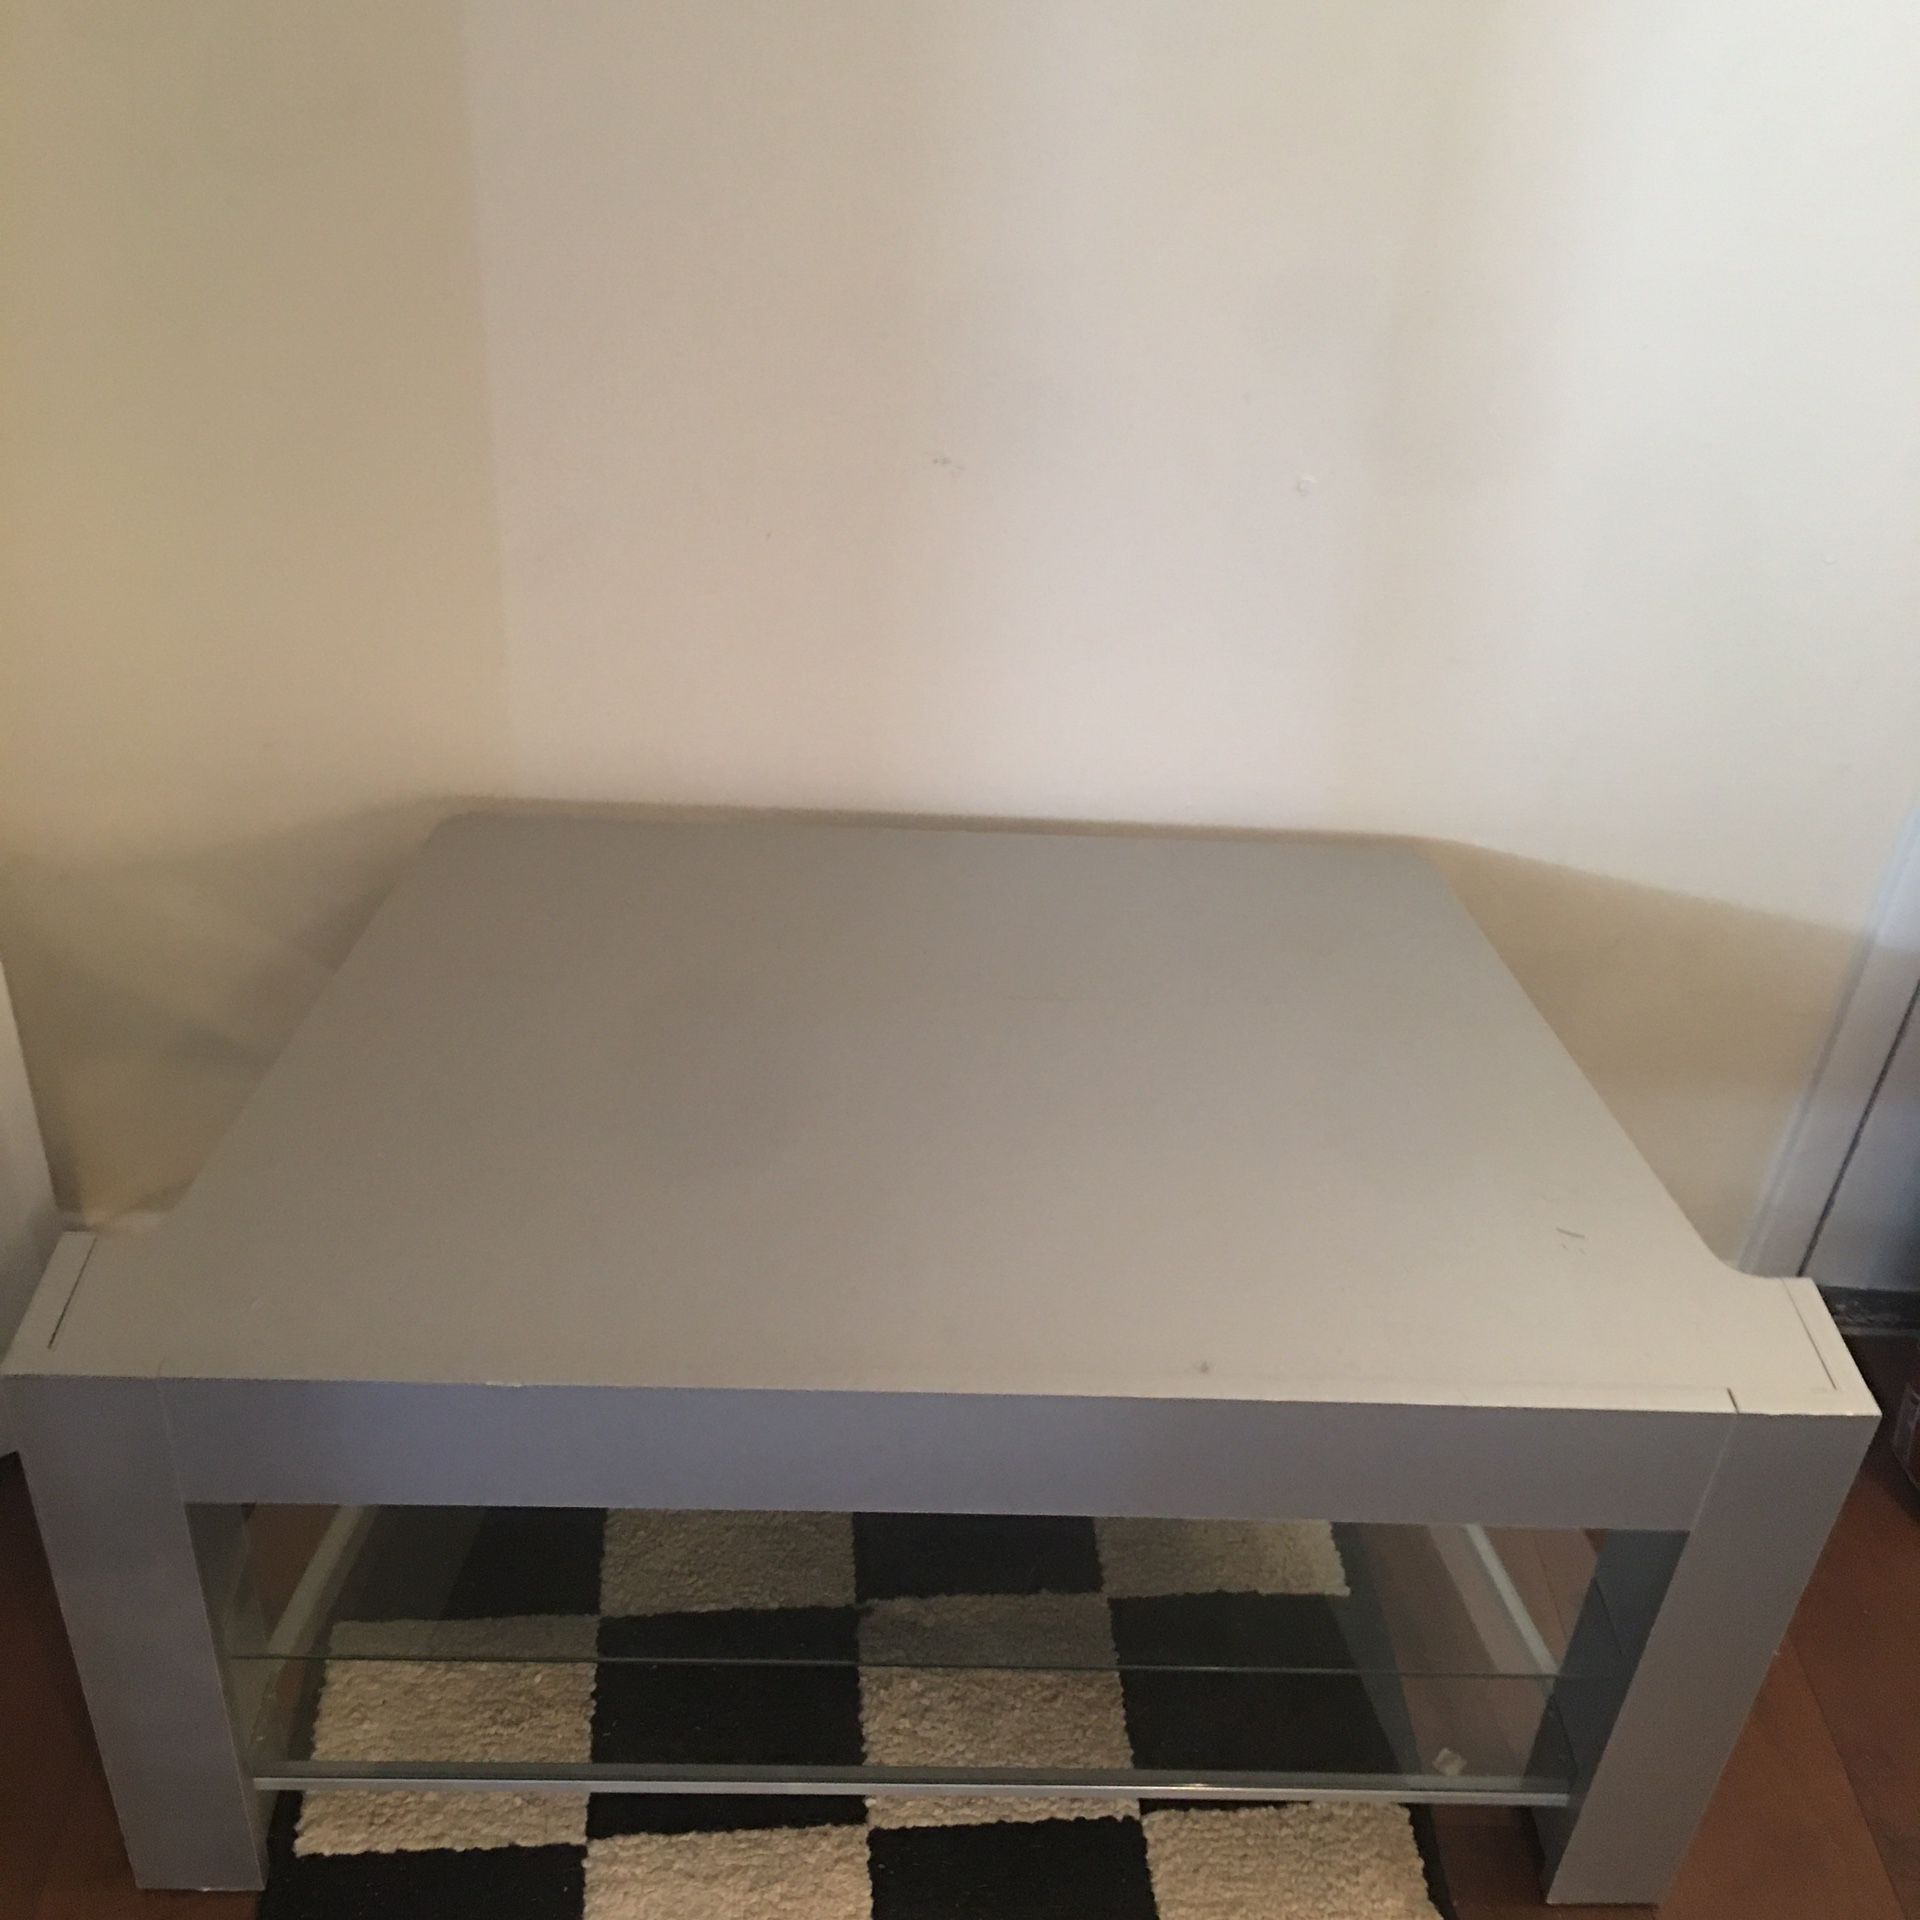 40 inch TV stand - 2 Glass Shelves